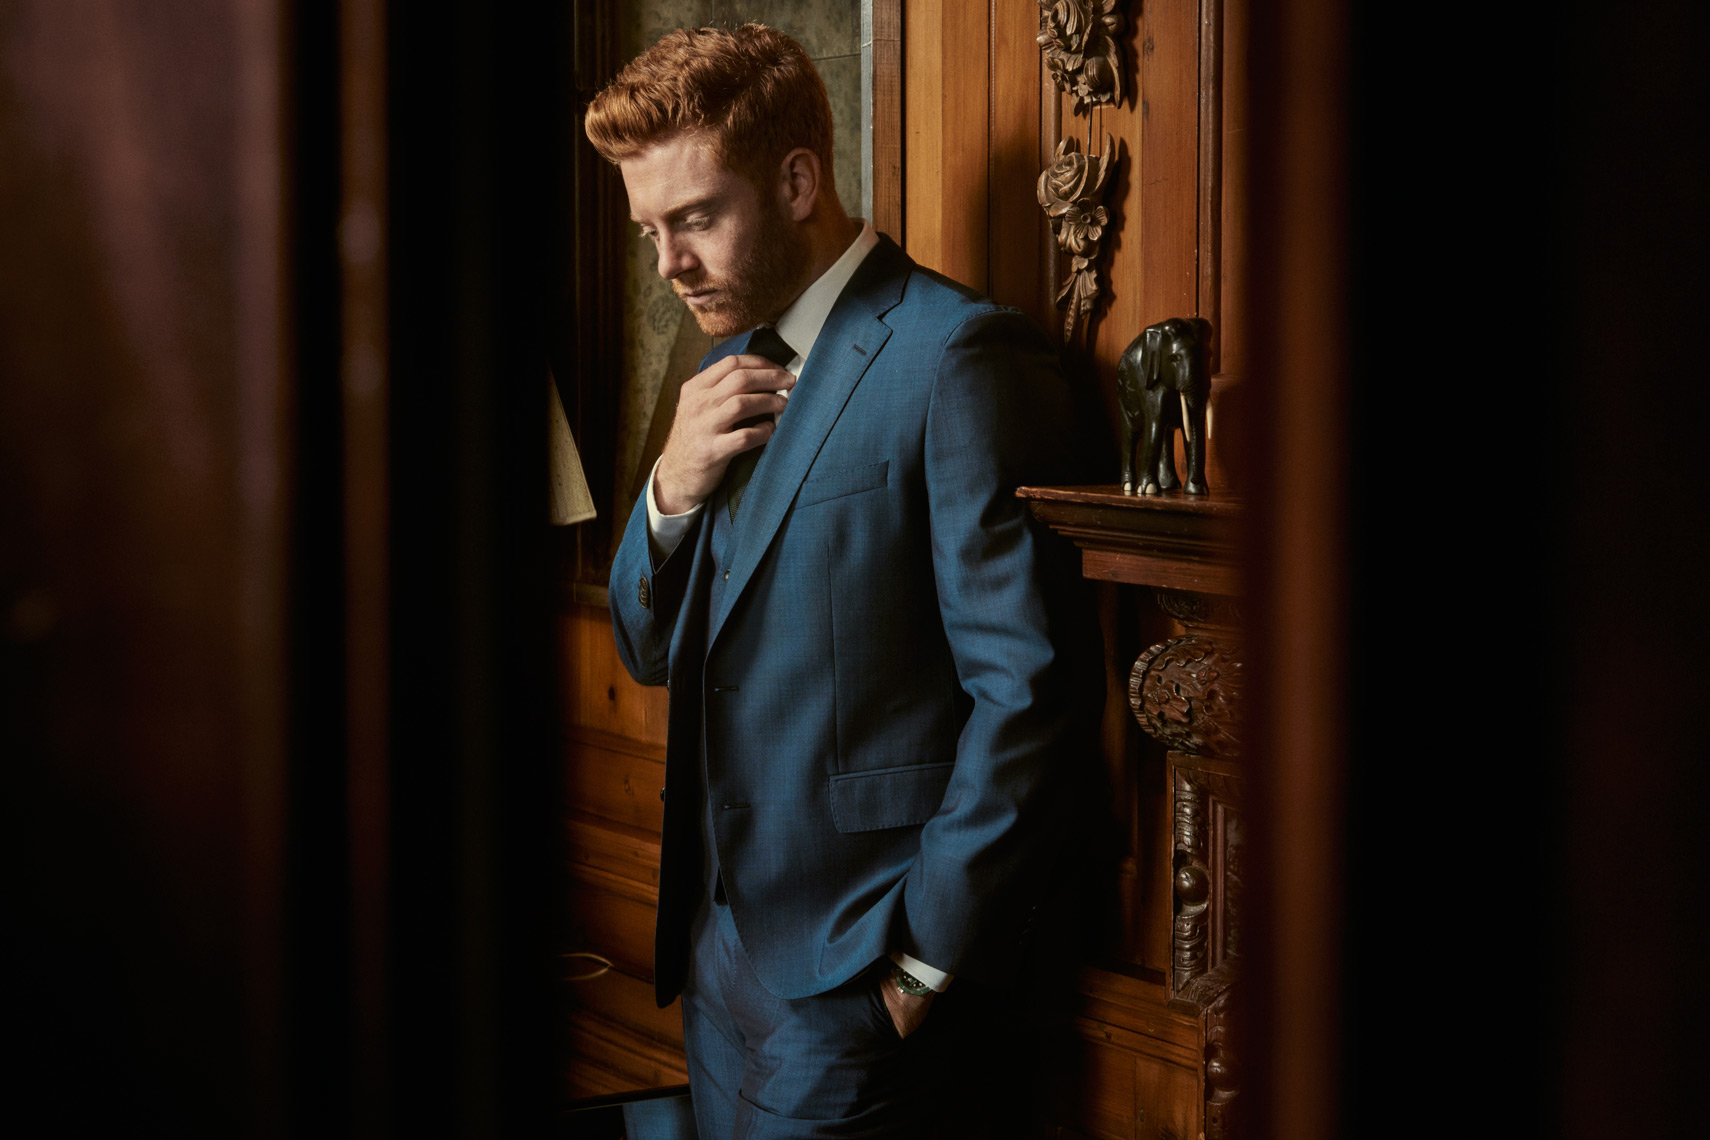 Cricketer Jonny Bairstow photographed for Times Magazine